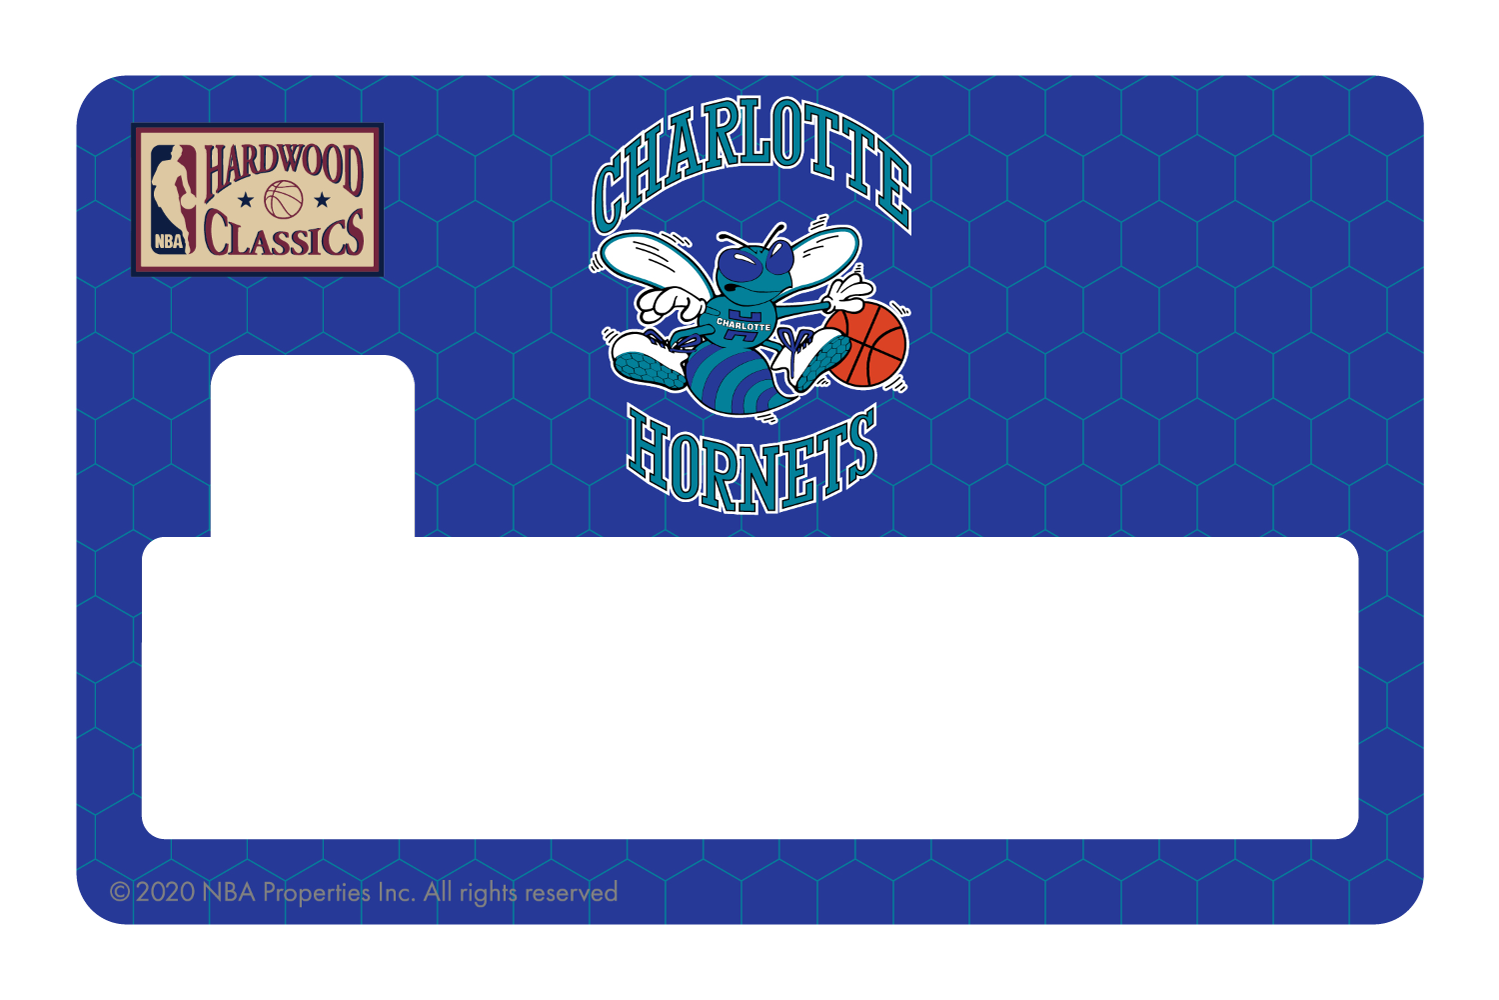 Credit Debit Card Skins | Cucu Covers - Customize Any Bank Card - Charlotte Hornets: Retro Courtside Hardwood Classics, Full Cover / Large Chip